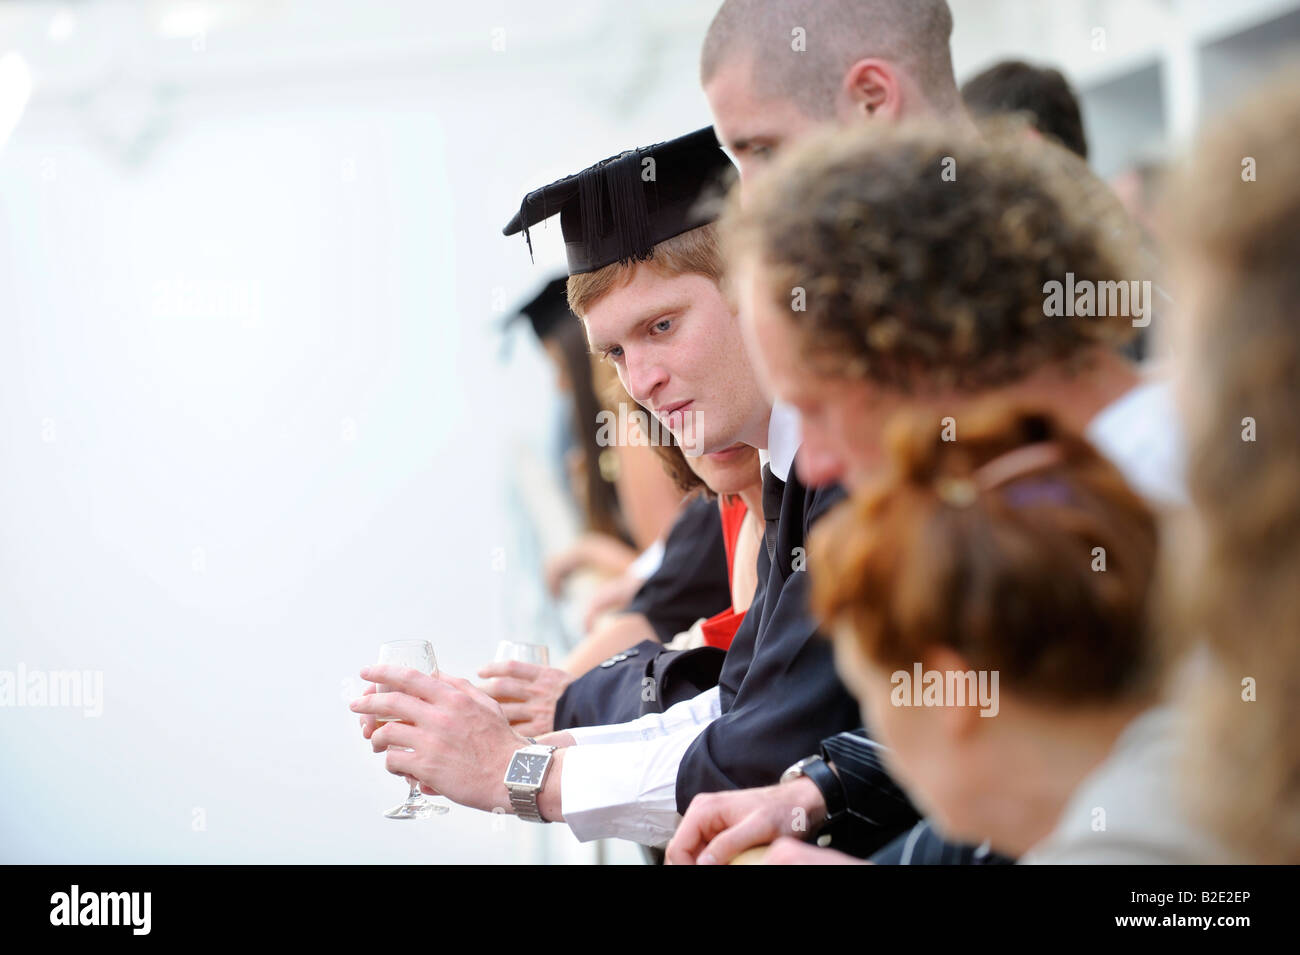 University of Sussex summer graduations at the Brighton Dome - A student looks from the balcony and surveys the hubbub. Stock Photo